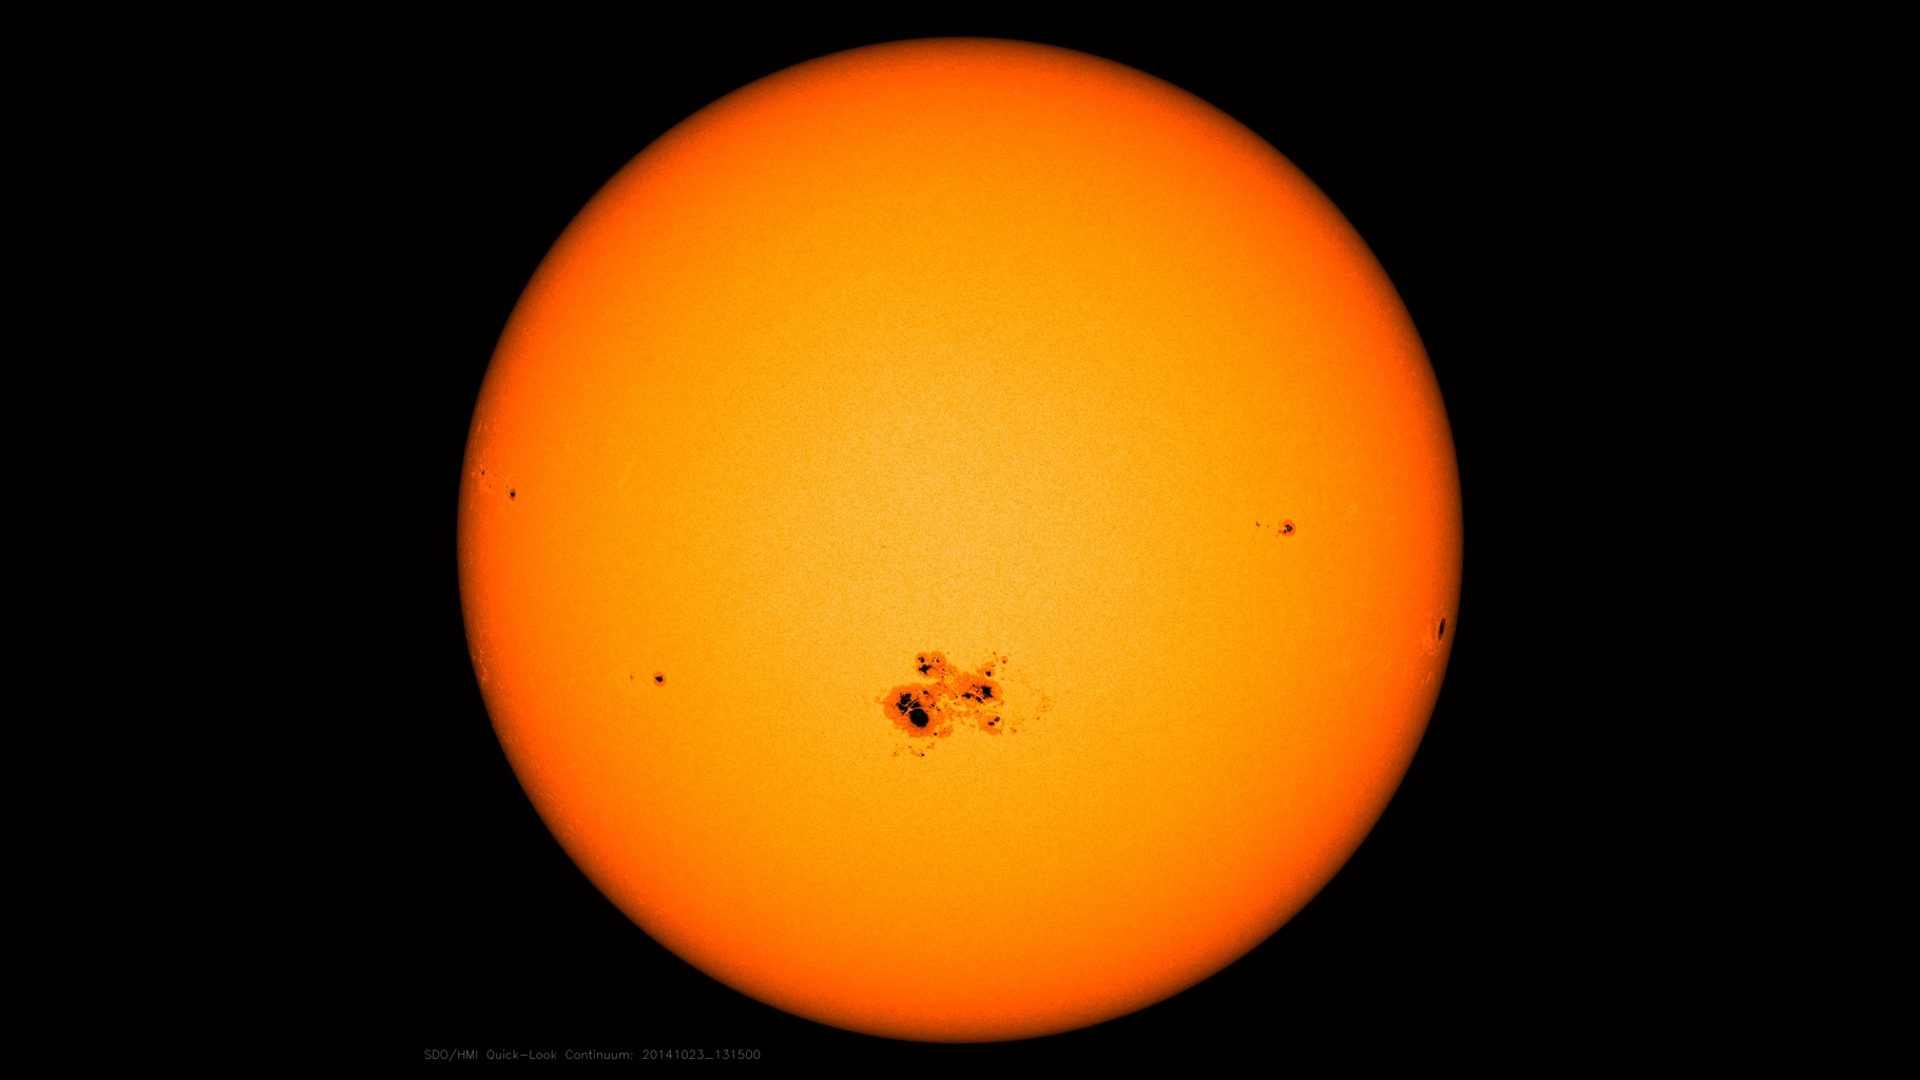 Sunspots are cooler regions on the surface of the sun that can cause eruptive disturbances, such as solar flares and coronal mass ejections.